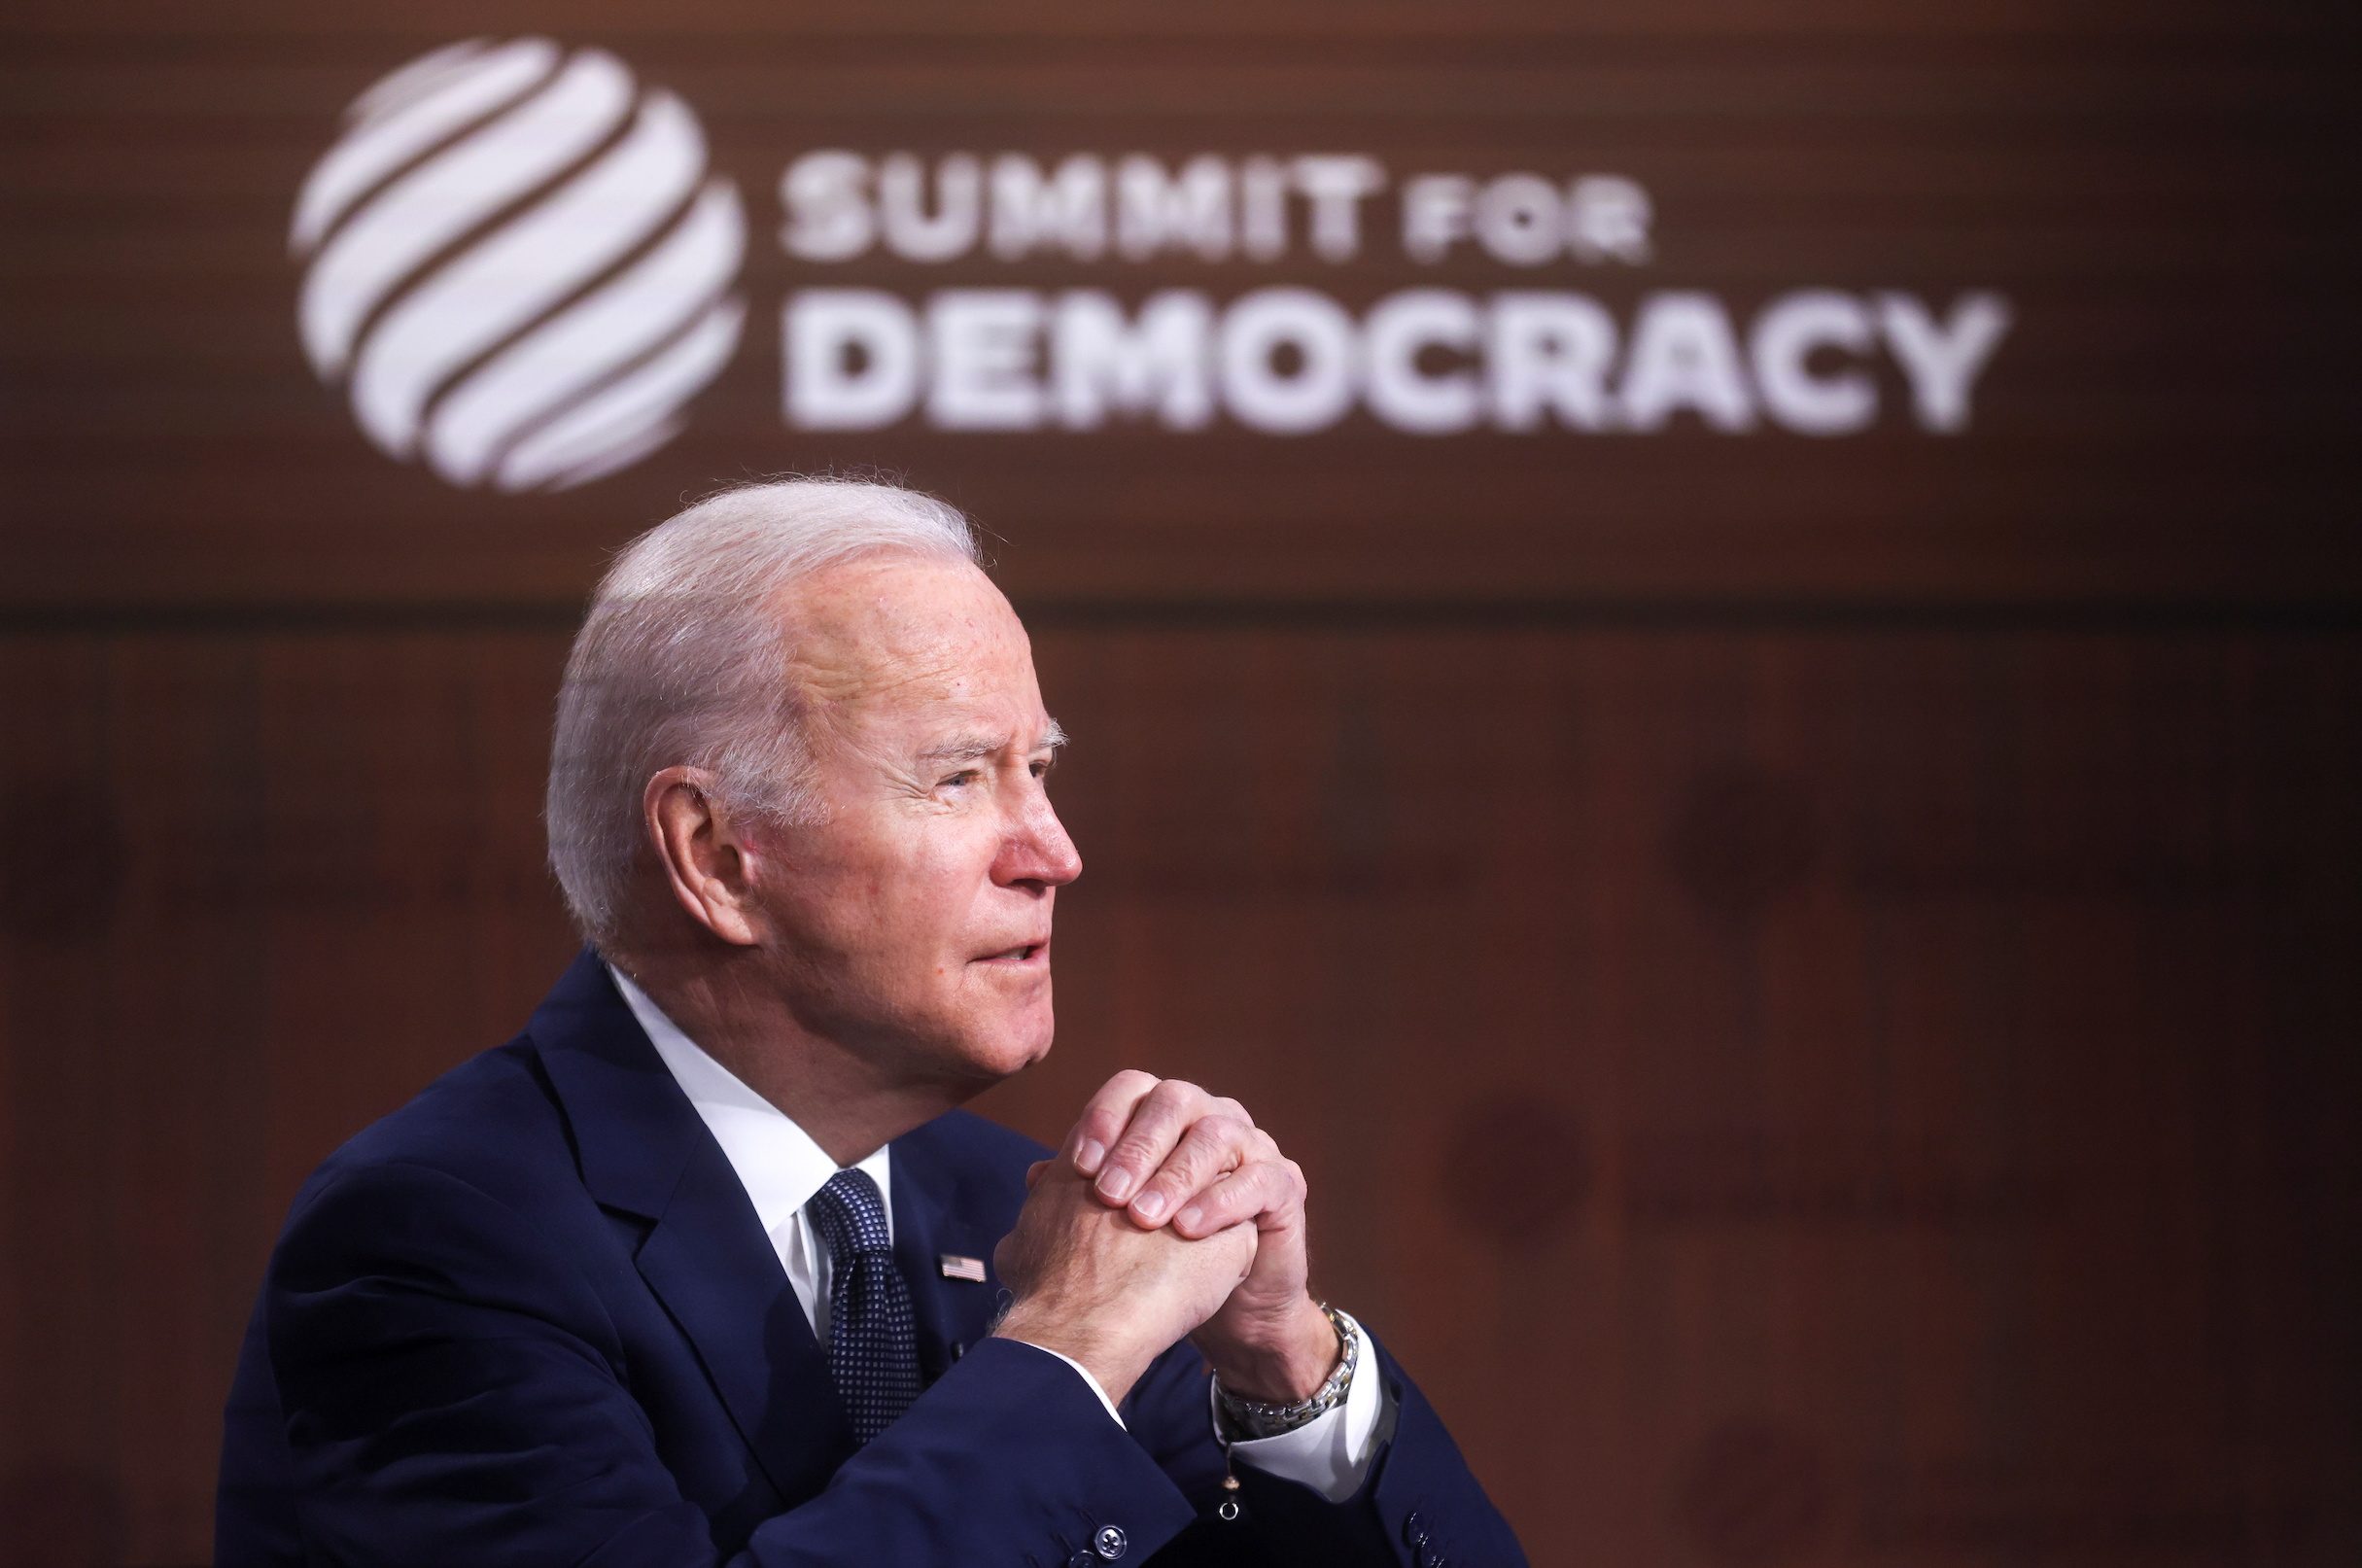 Human Rights Watch criticizes Biden, others for weak defense of democracy